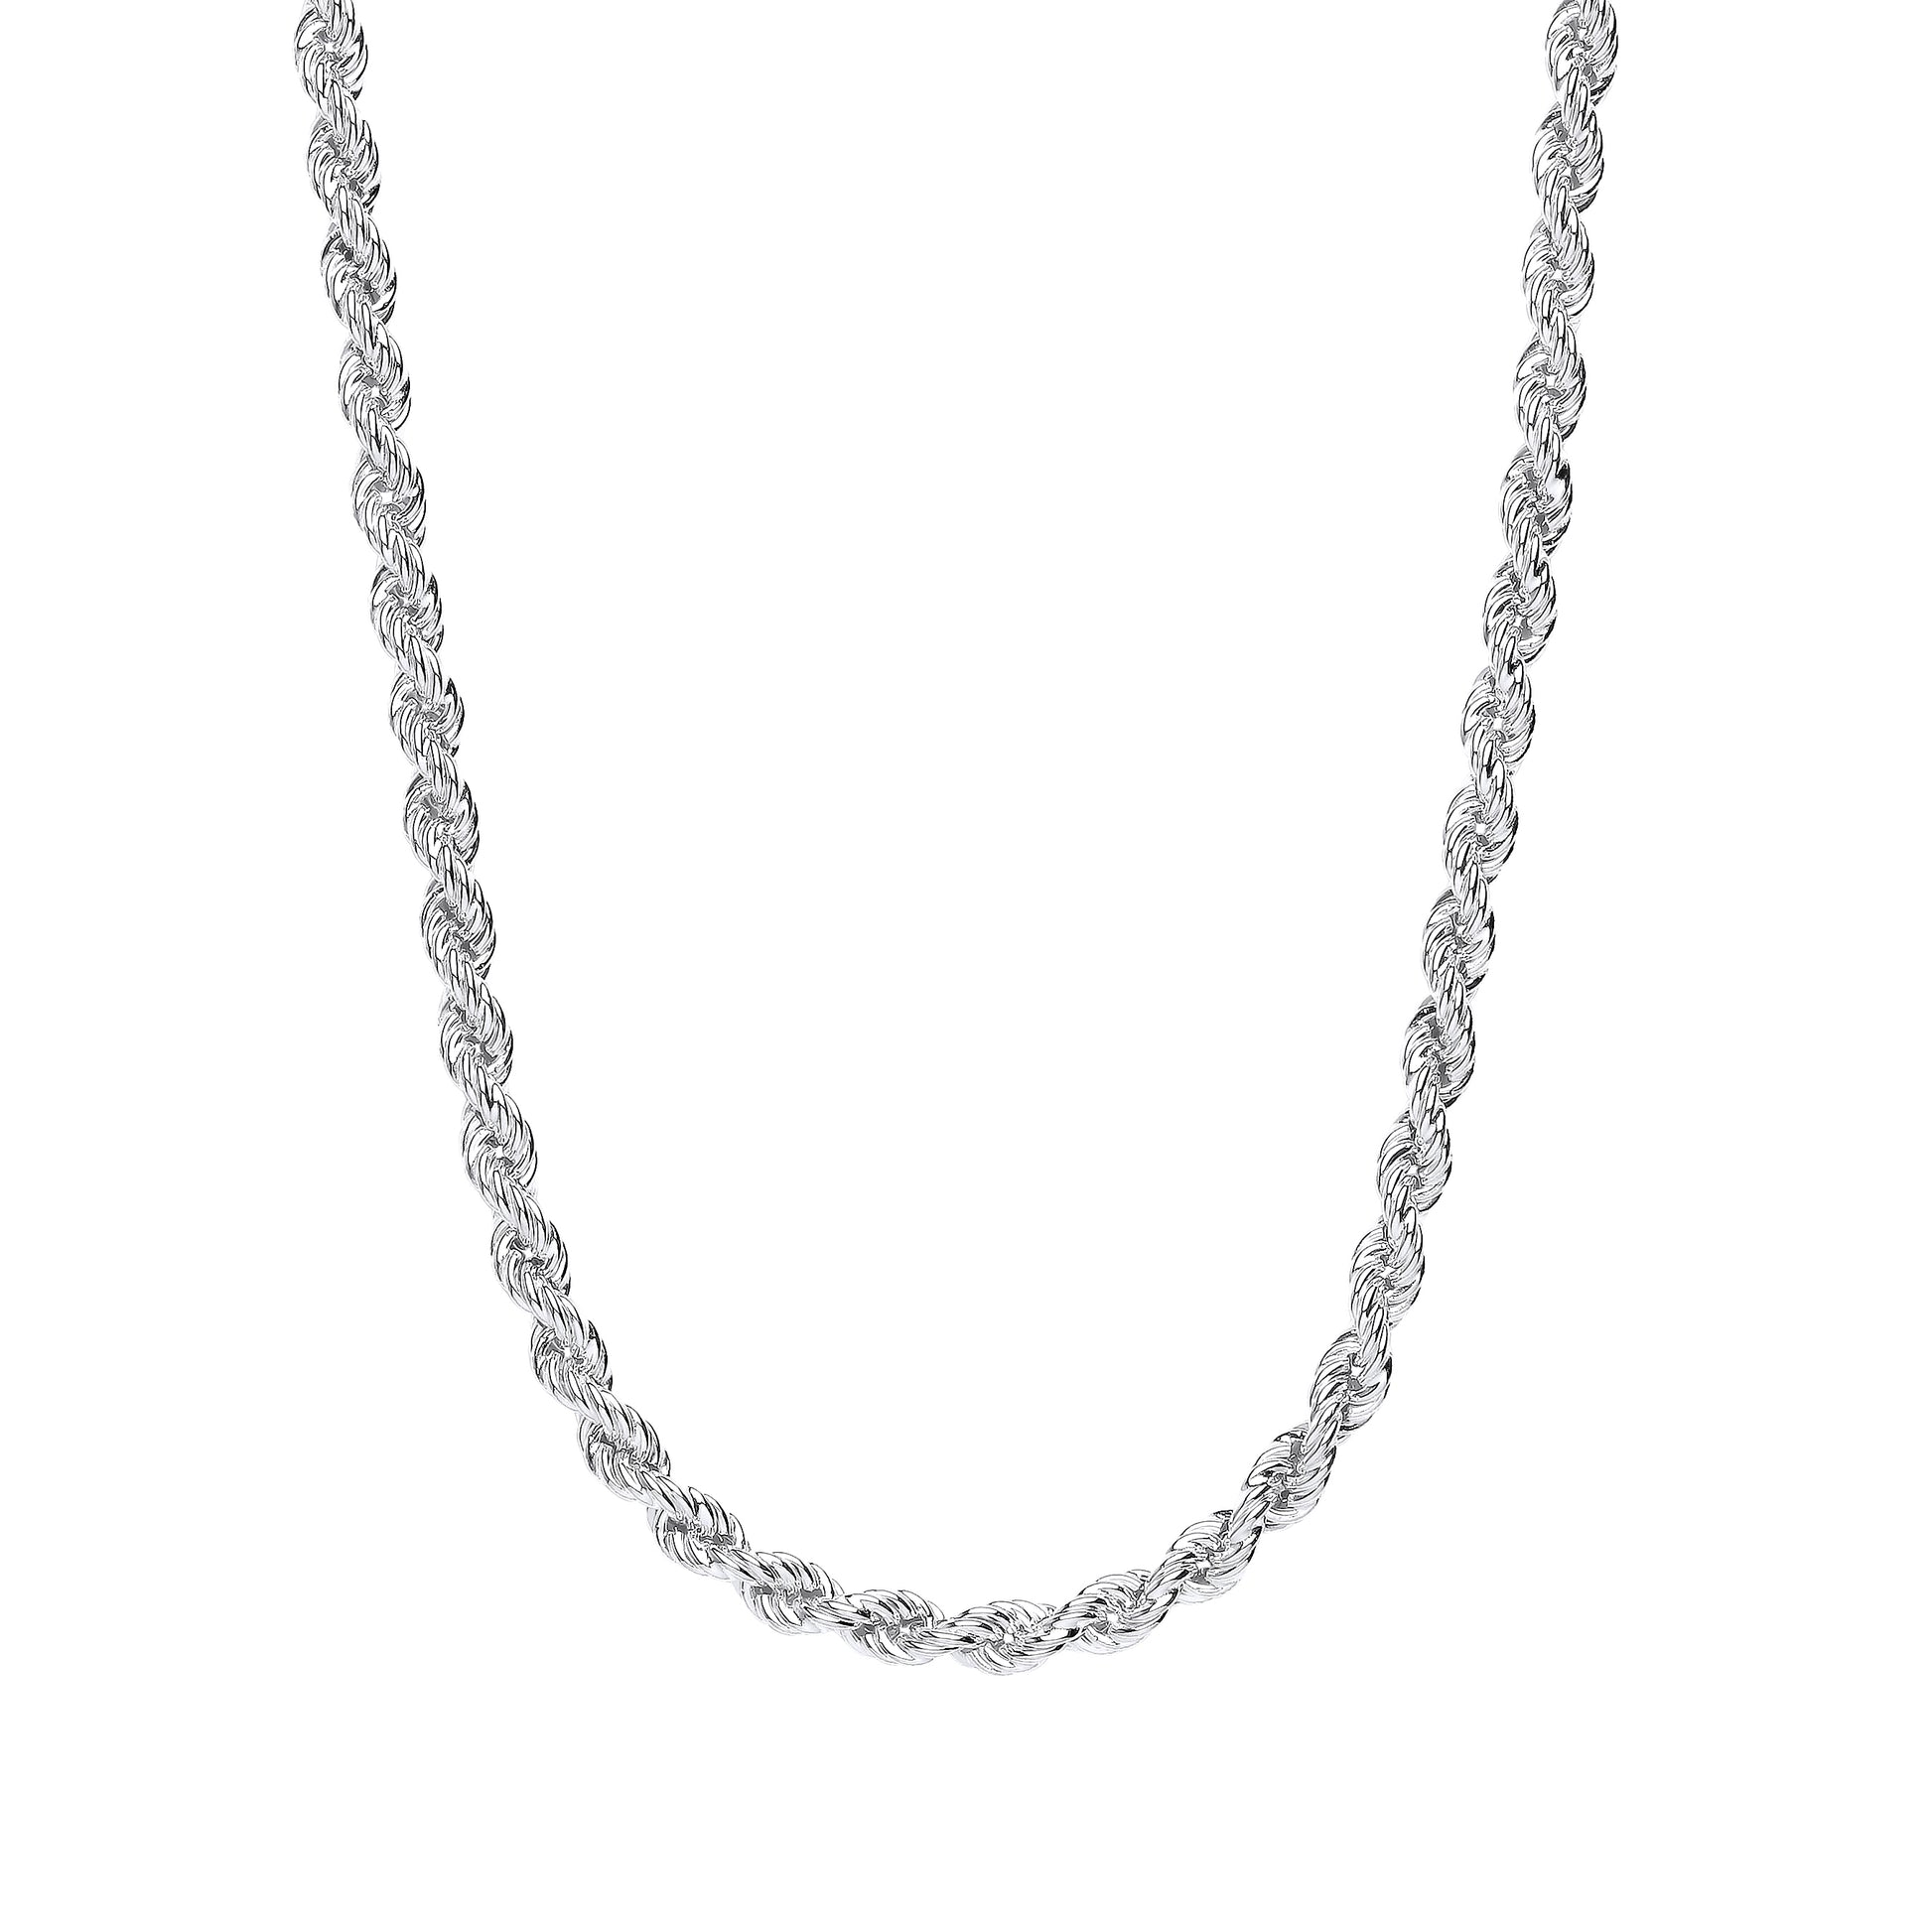 Silver  Hollow Twisted Rope Link Chain Necklace 16" + 2" - GVK433